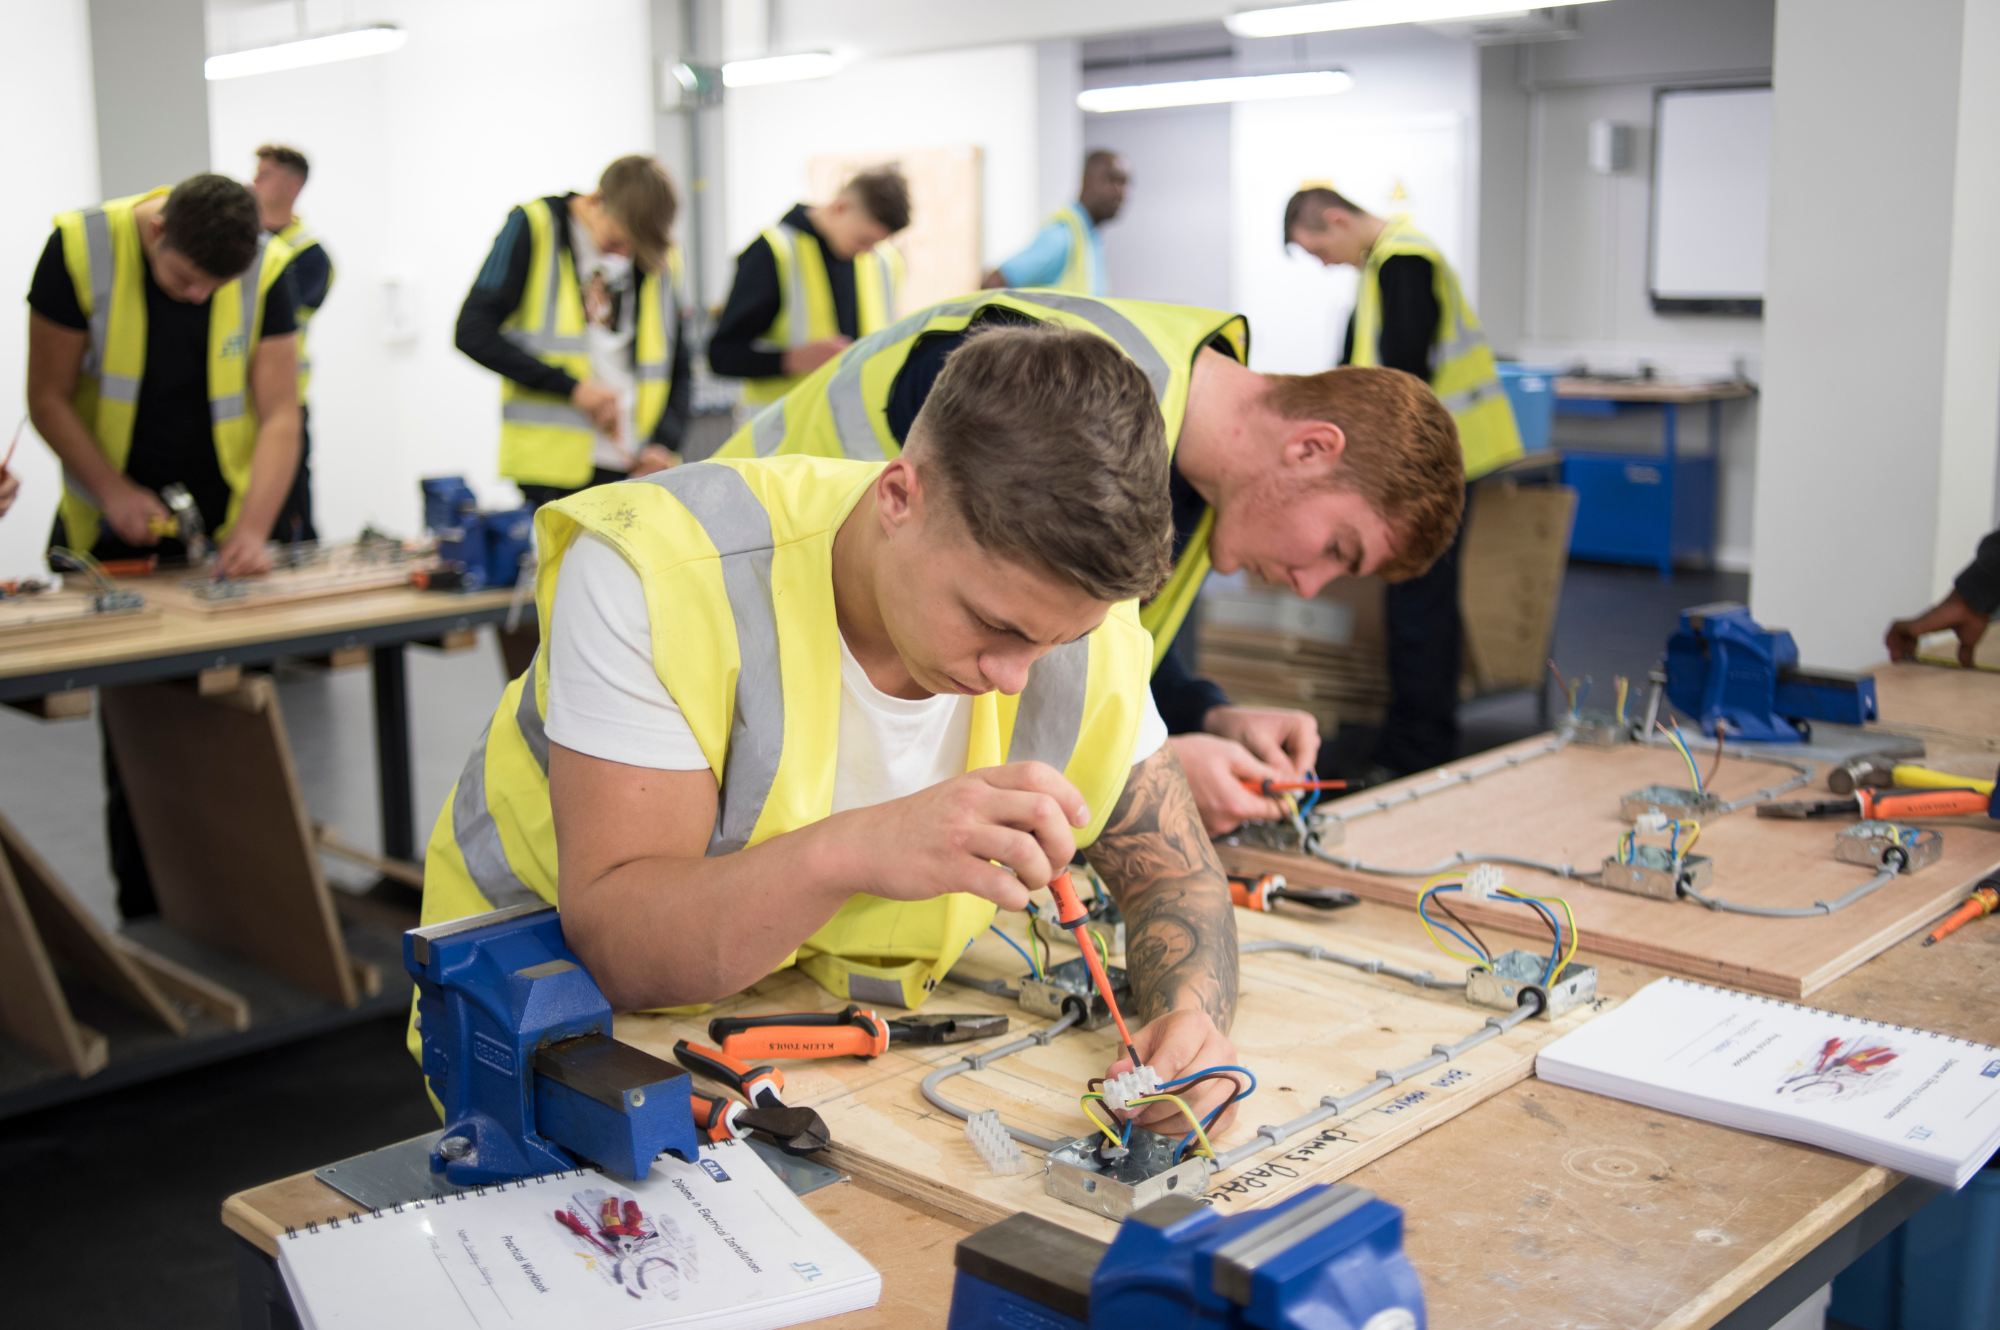 5 reasons why a JTL apprenticeship could be for you